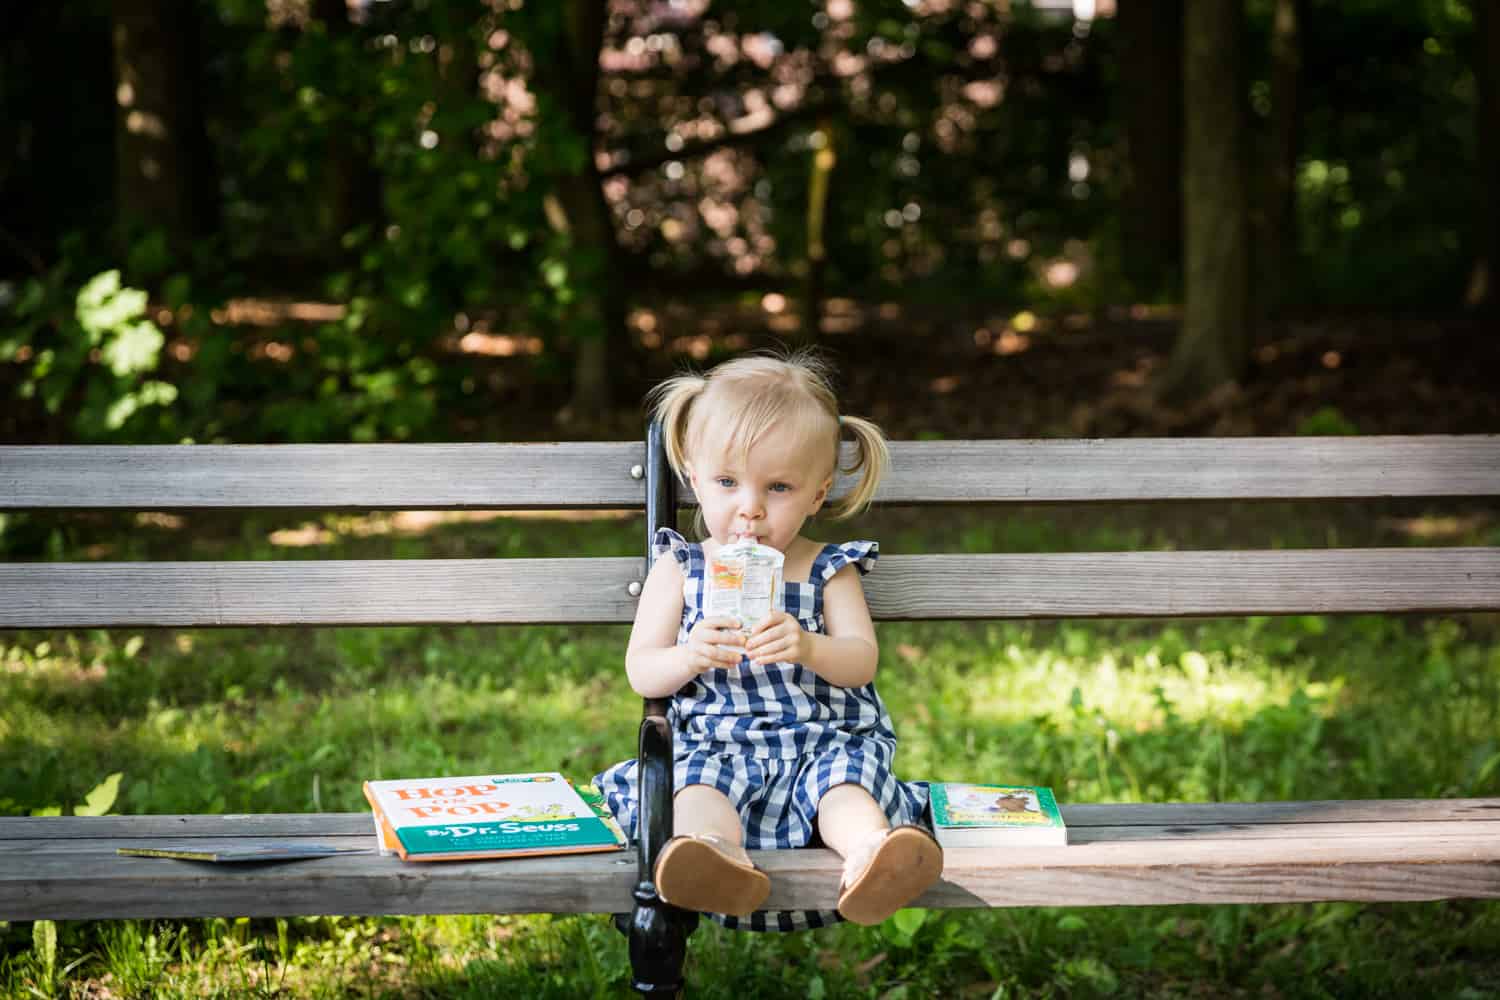 Little girl with pigtails drinking from juice box on bench during a Forest Park family photo shoot